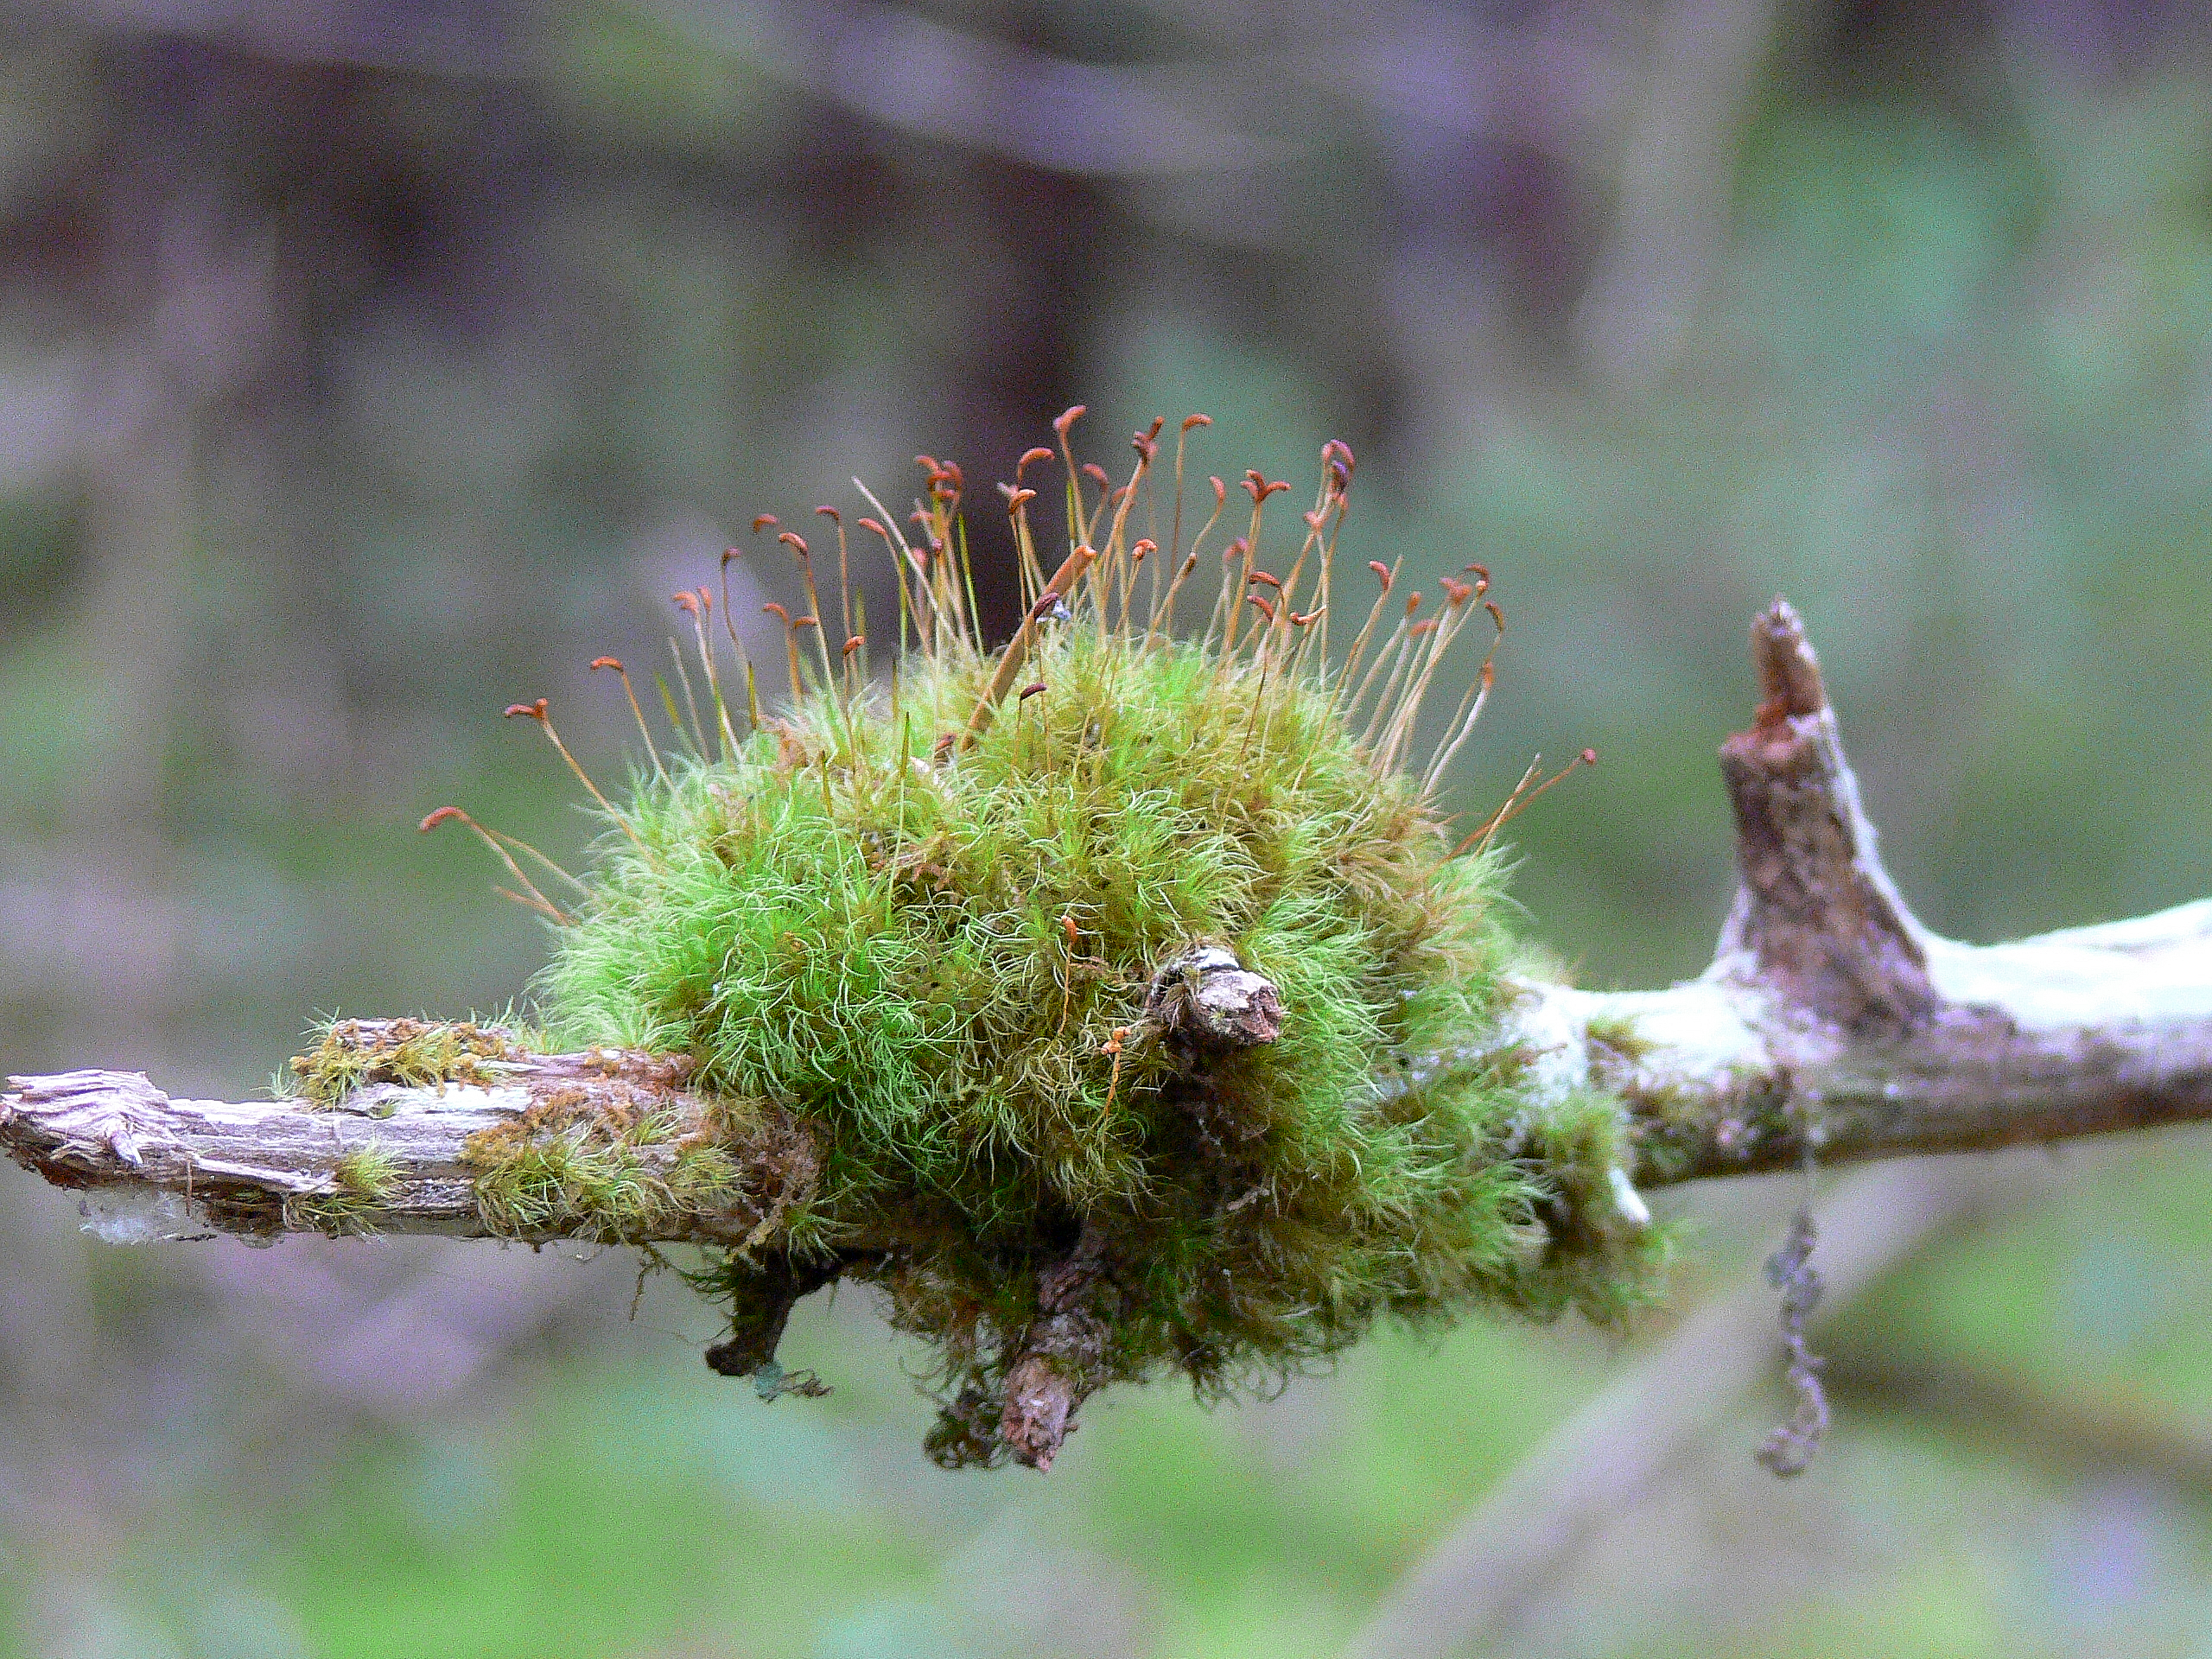 A clump of moss with small plants sprouting out of it sits on the end of a tree branch,